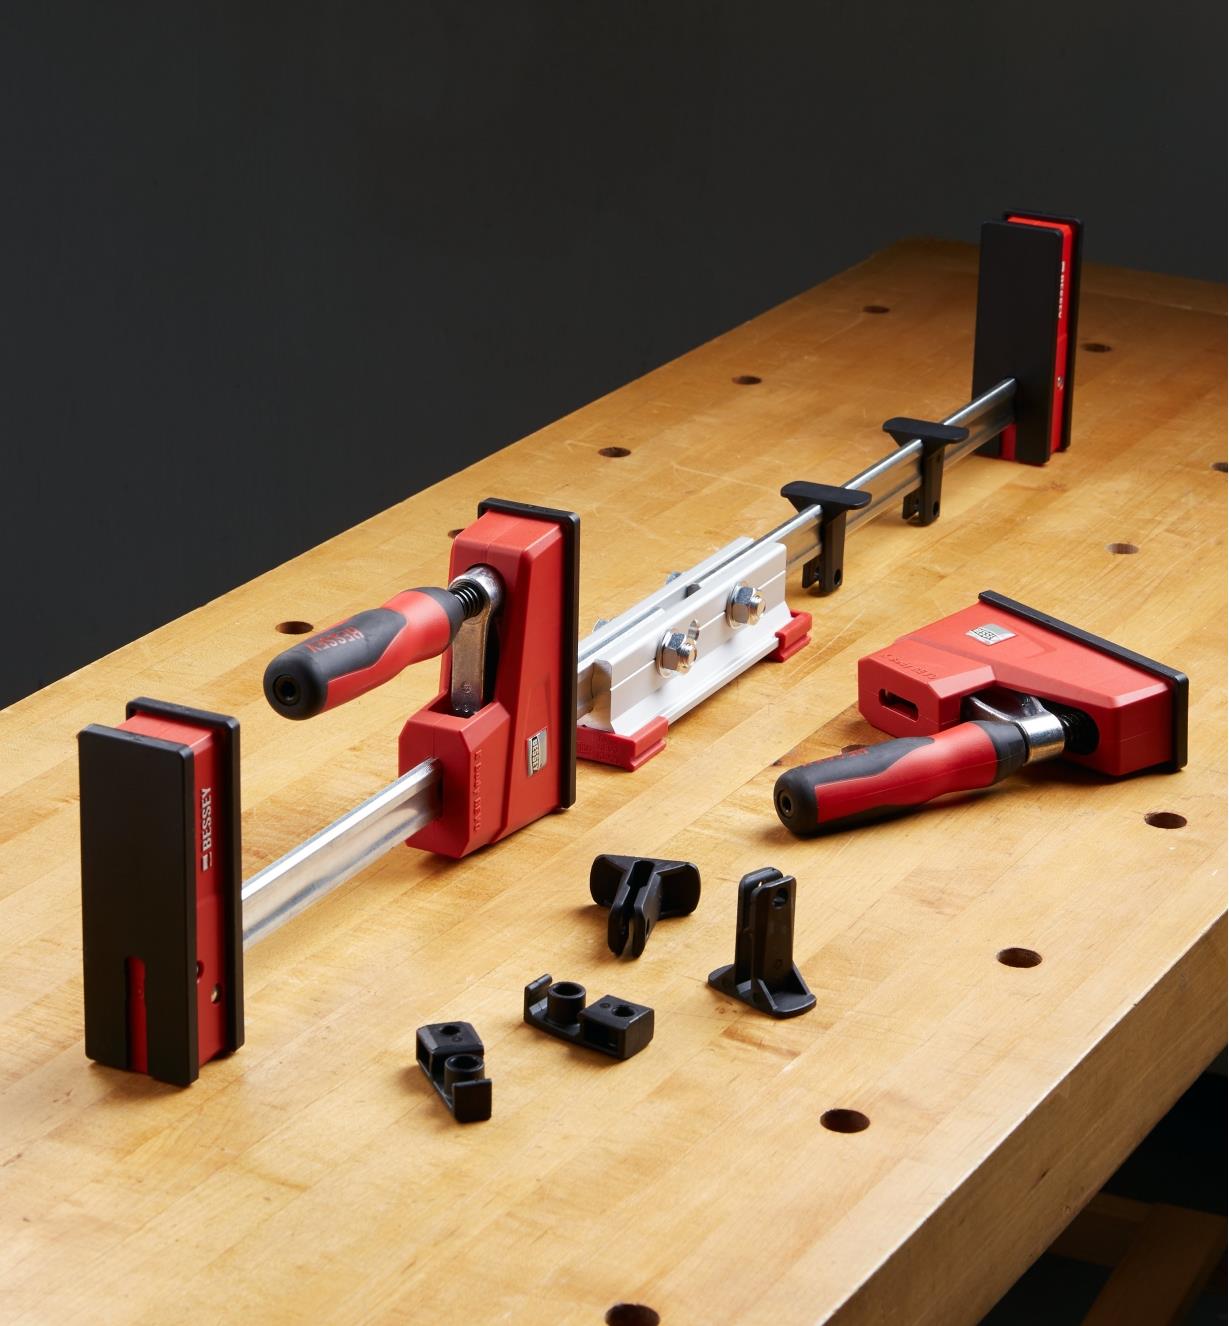 Bessey clamp connector used to join two REVO clamps, extending their reach